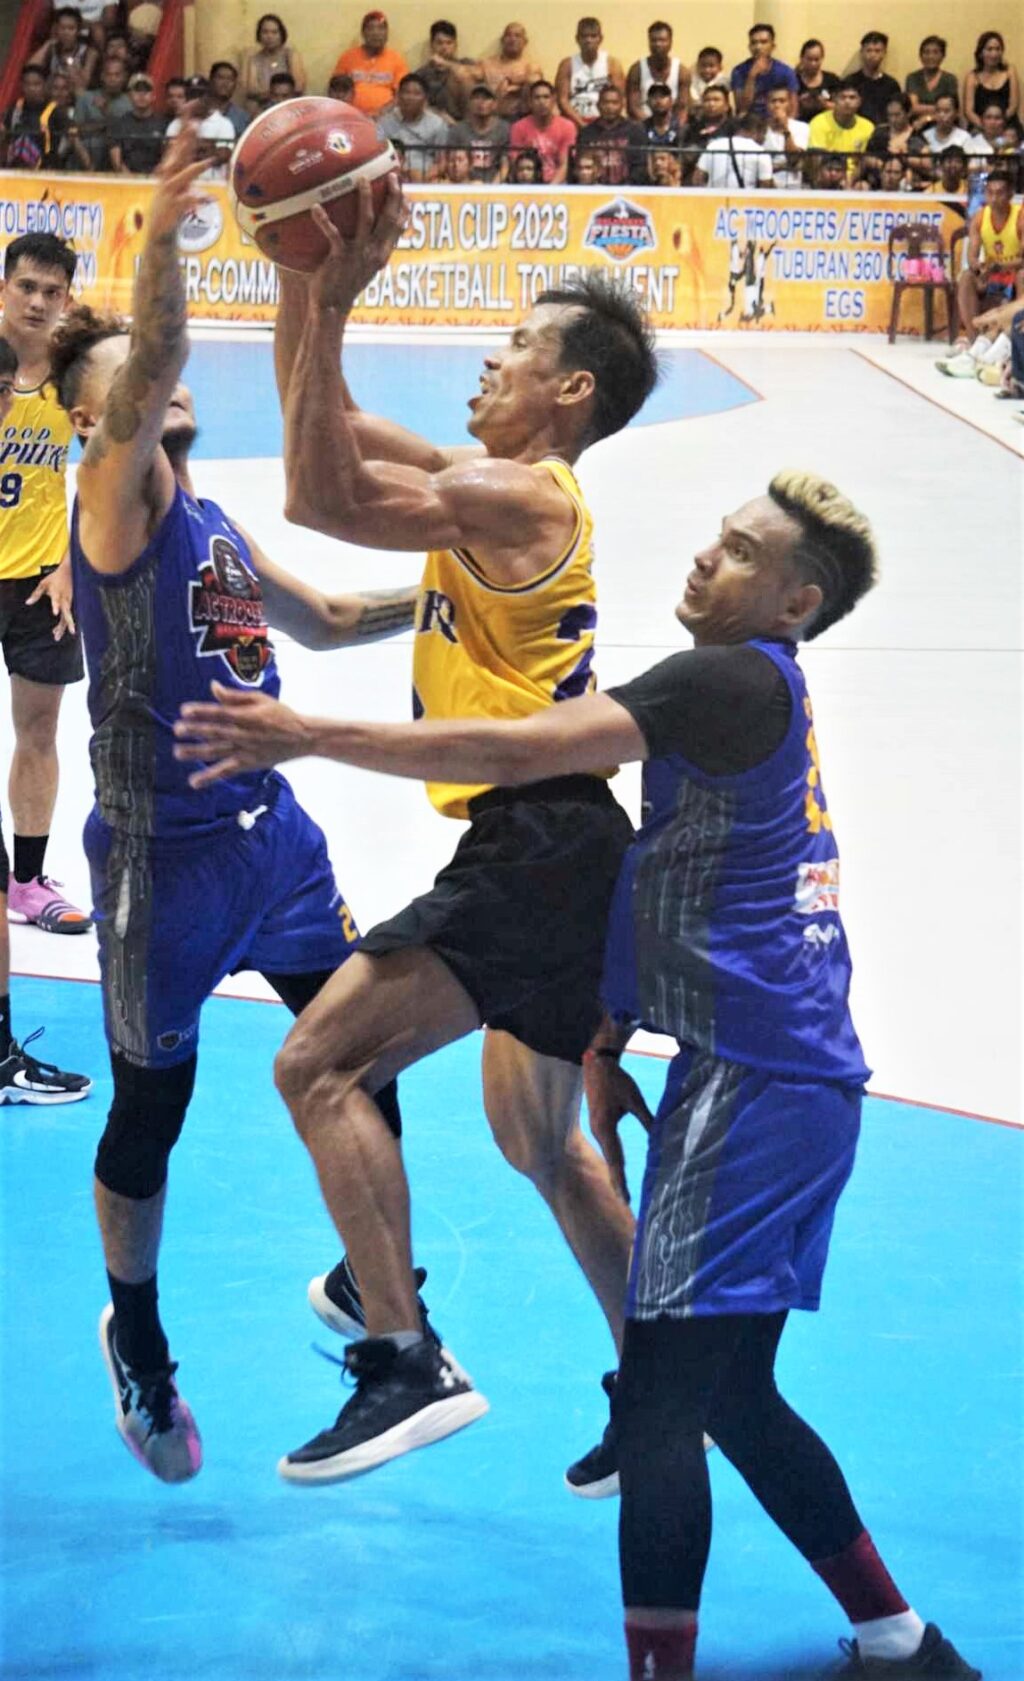 Jojo Tangkay of Good Shepherd-Toledo attempts a difficult shot while being heavily defended by players from AC Troopers/Eversure Catmon during their game in the 2023 Balamban Fiesta Cup Inter-commercial league.